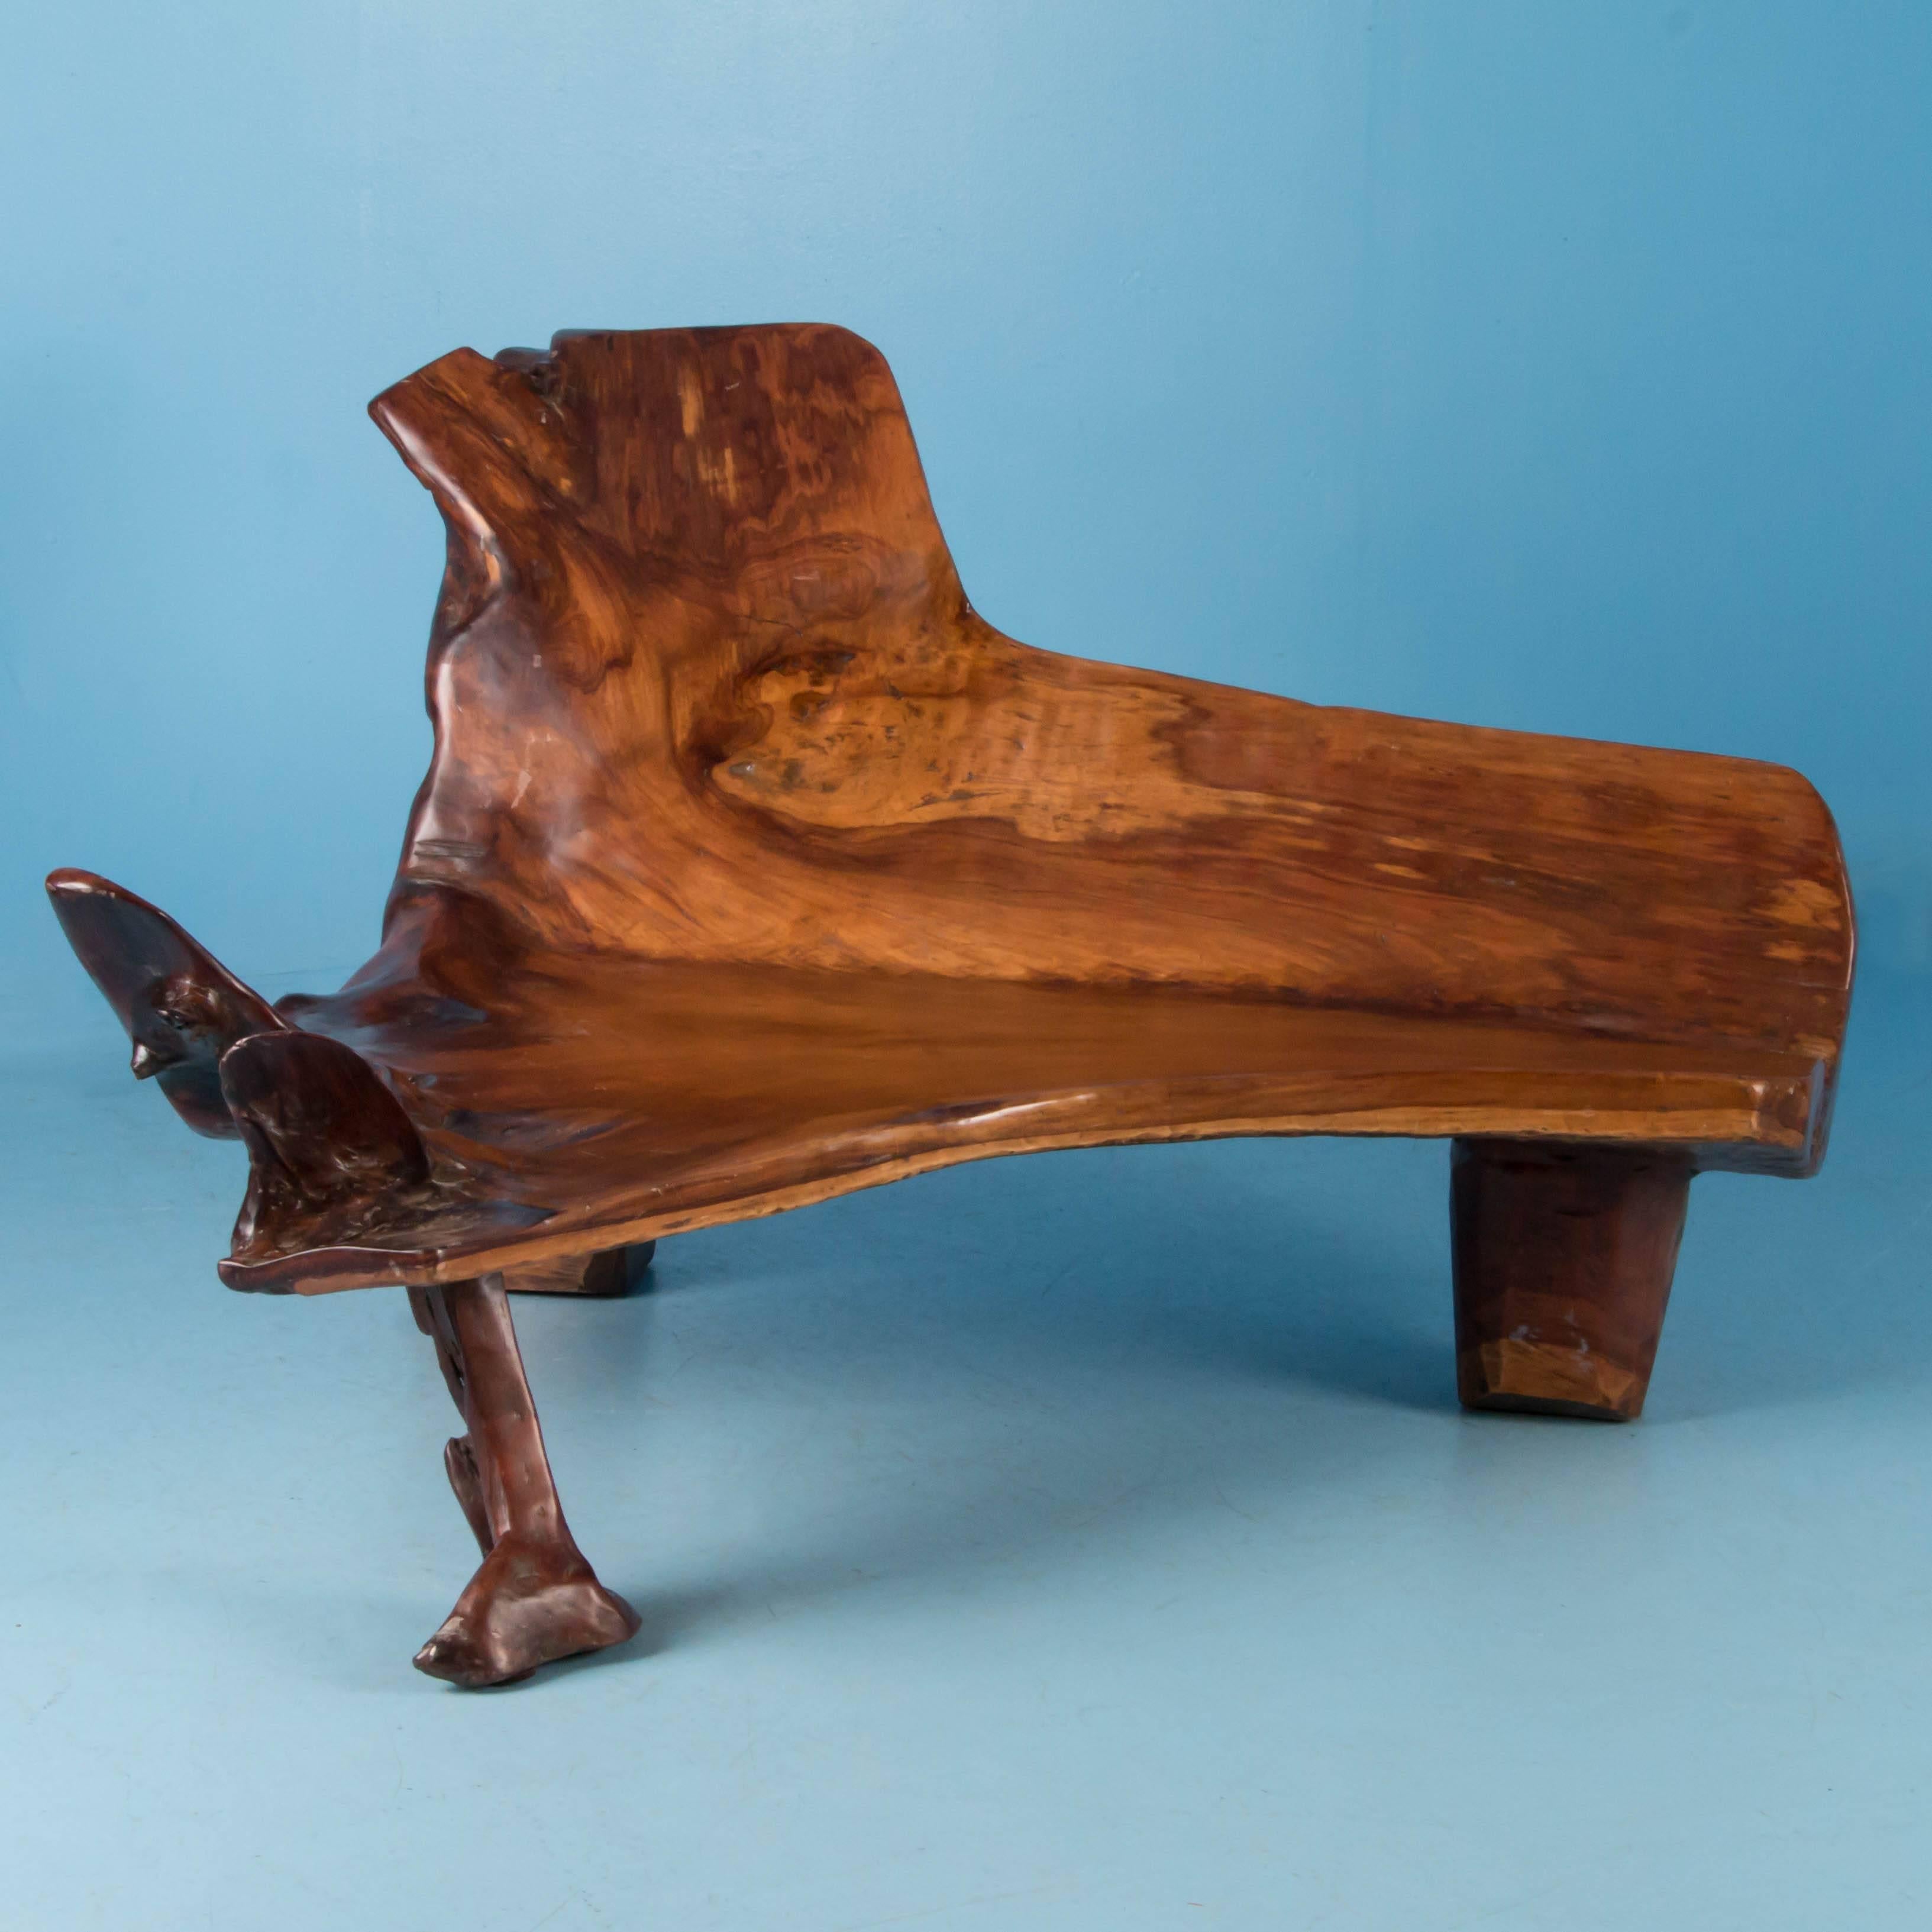 This dramatic live edge remnant from the root and trunk of a hardwood (possibly narra or molave) has been converted into a small bench or lounge chair. The free-form and large seat allow for a variety of uses including a platform for displaying art.